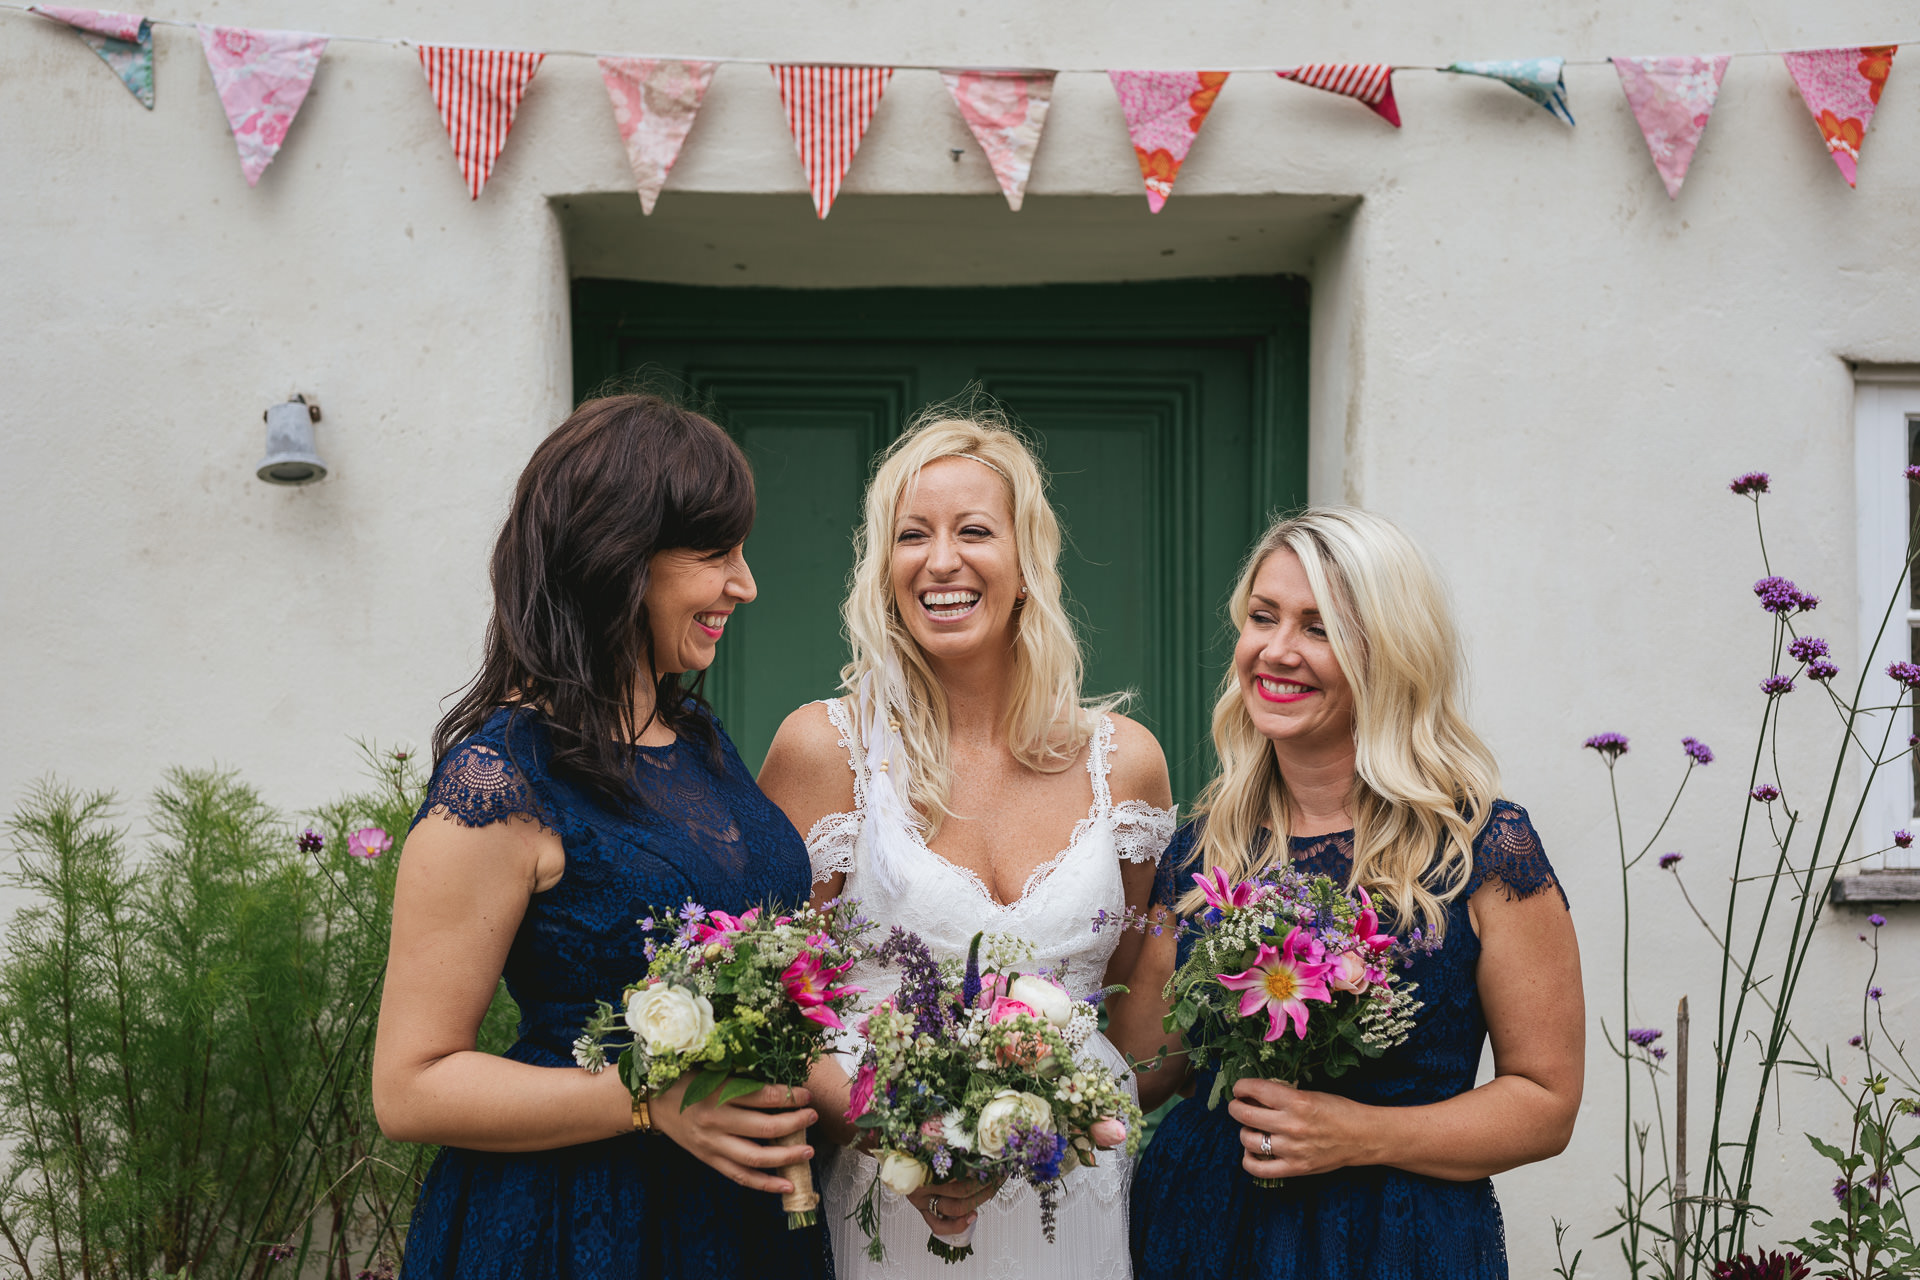 Bride and bridesmaids laughing together